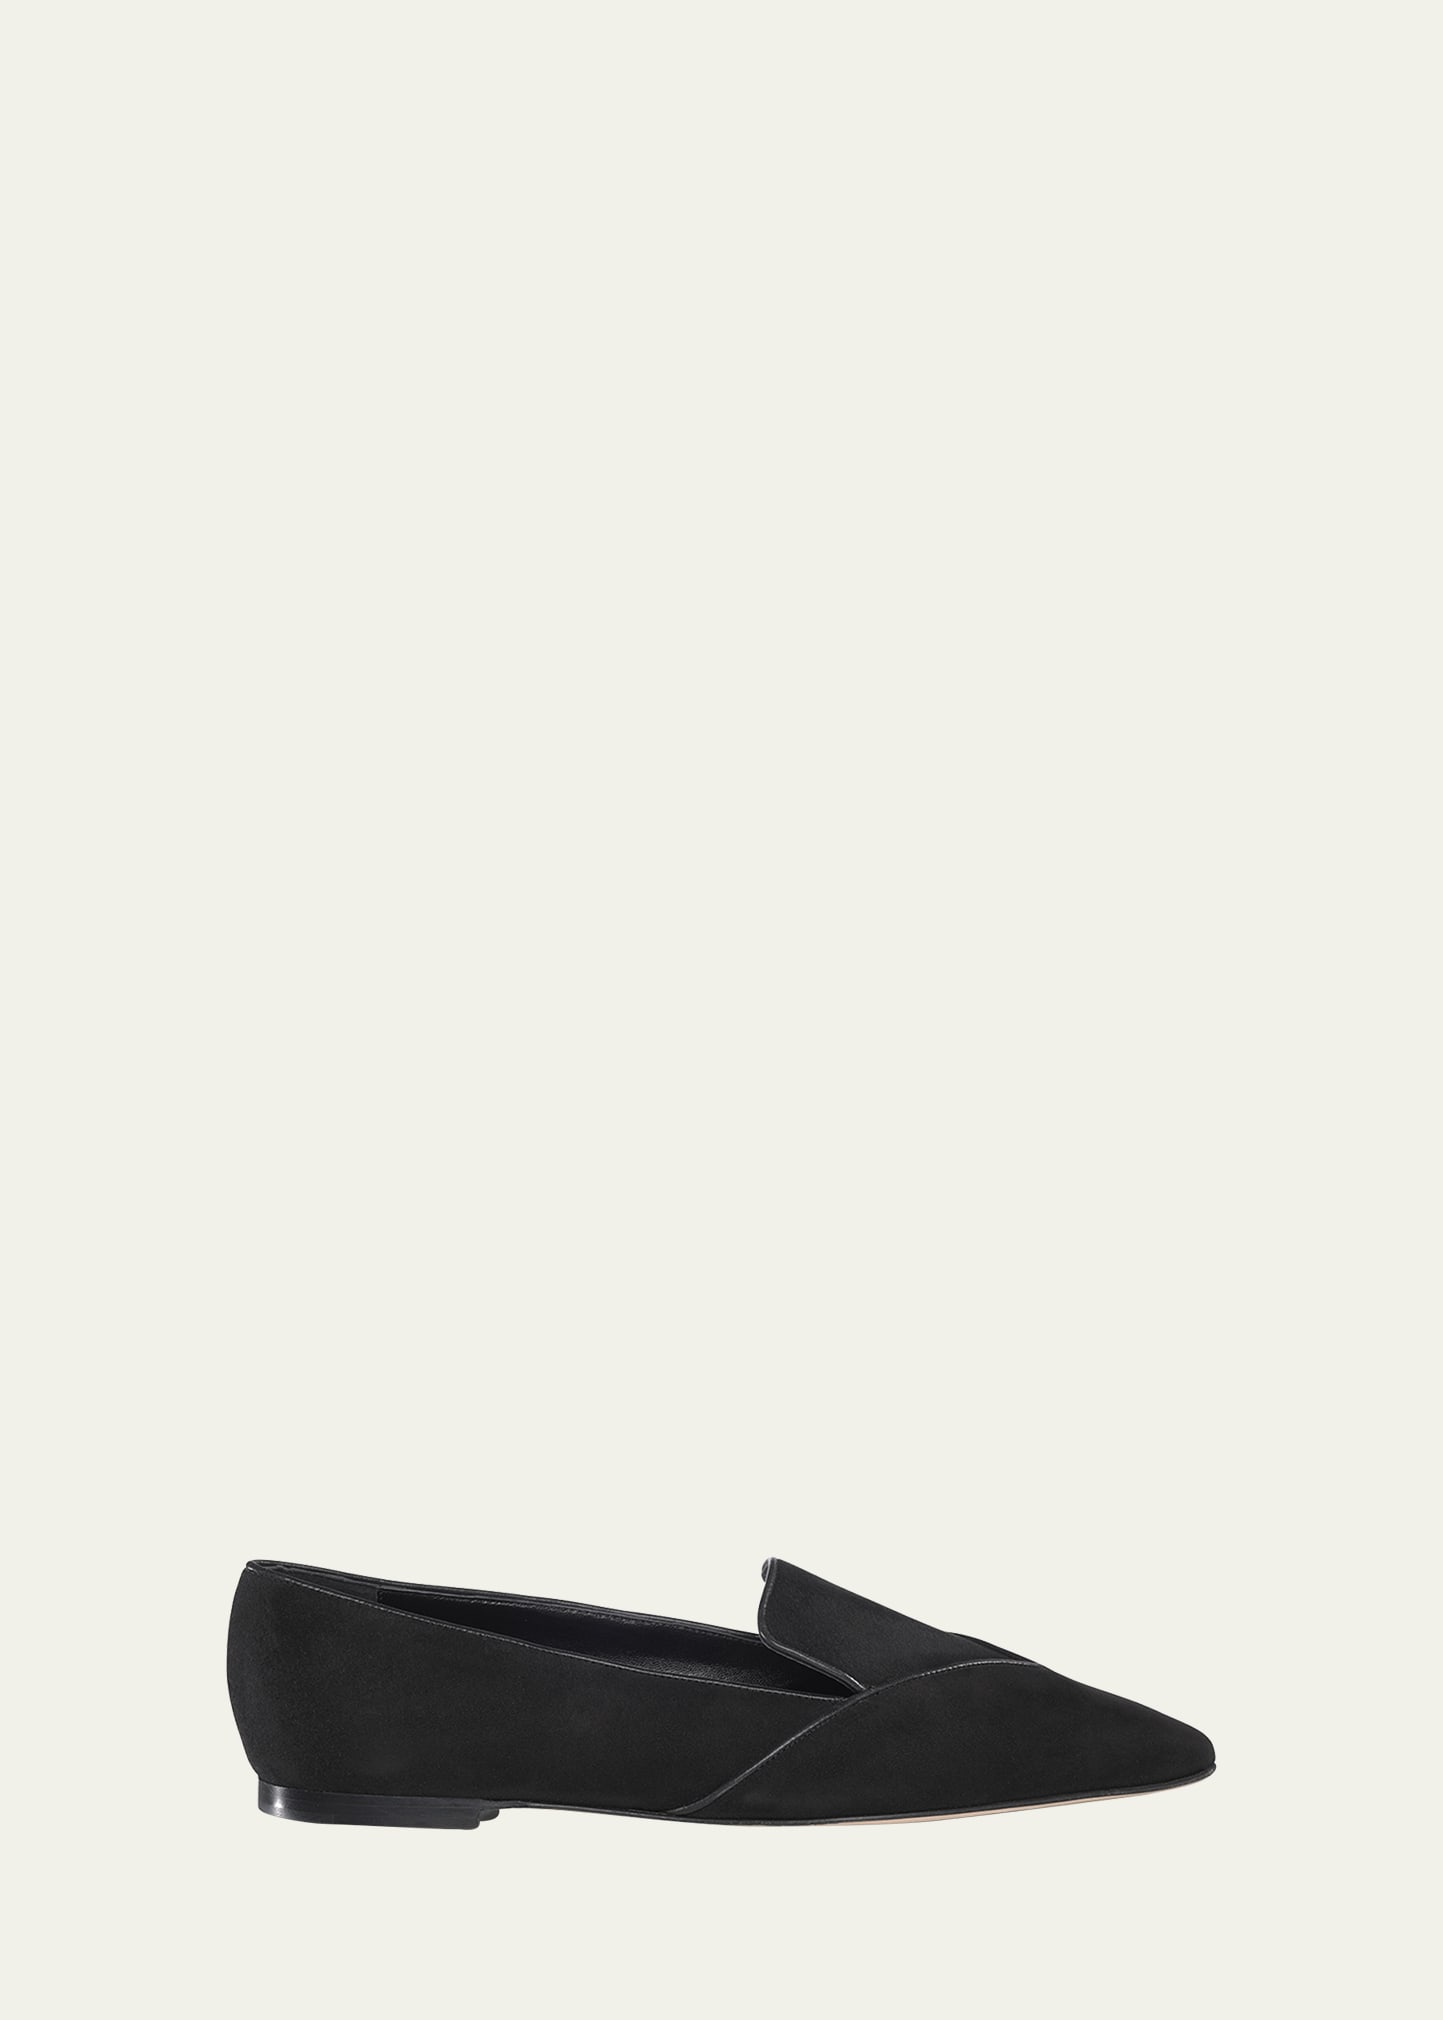 MARION PARKE RAQUEL SUEDE FLAT LOAFERS